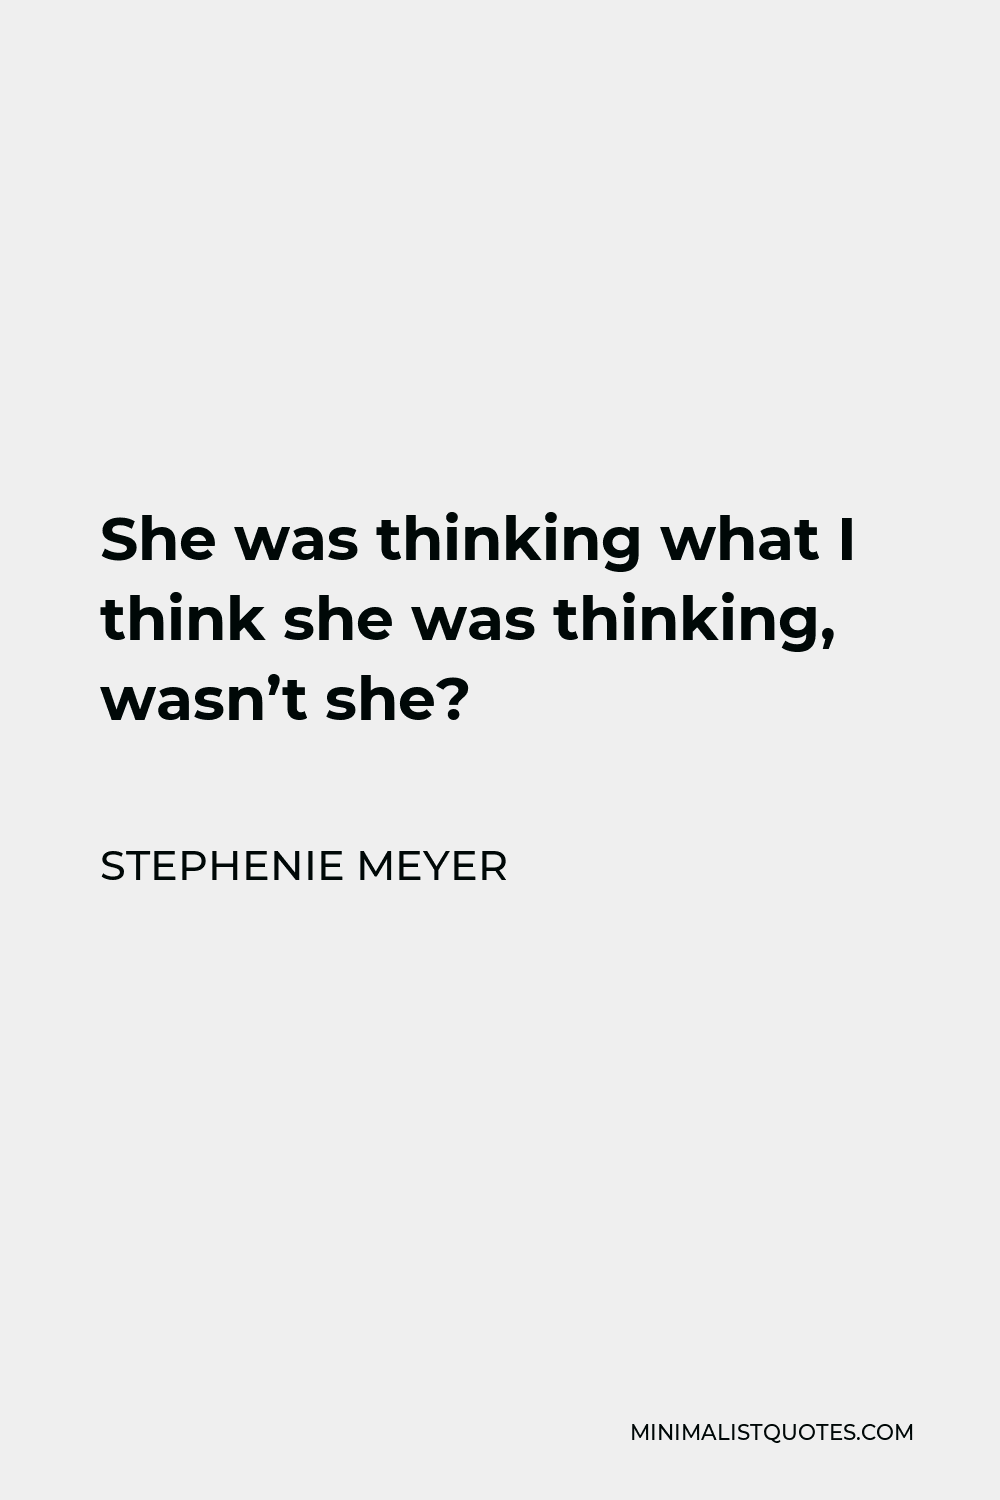 Stephenie Meyer Quote - She was thinking what I think she was thinking, wasn’t she?